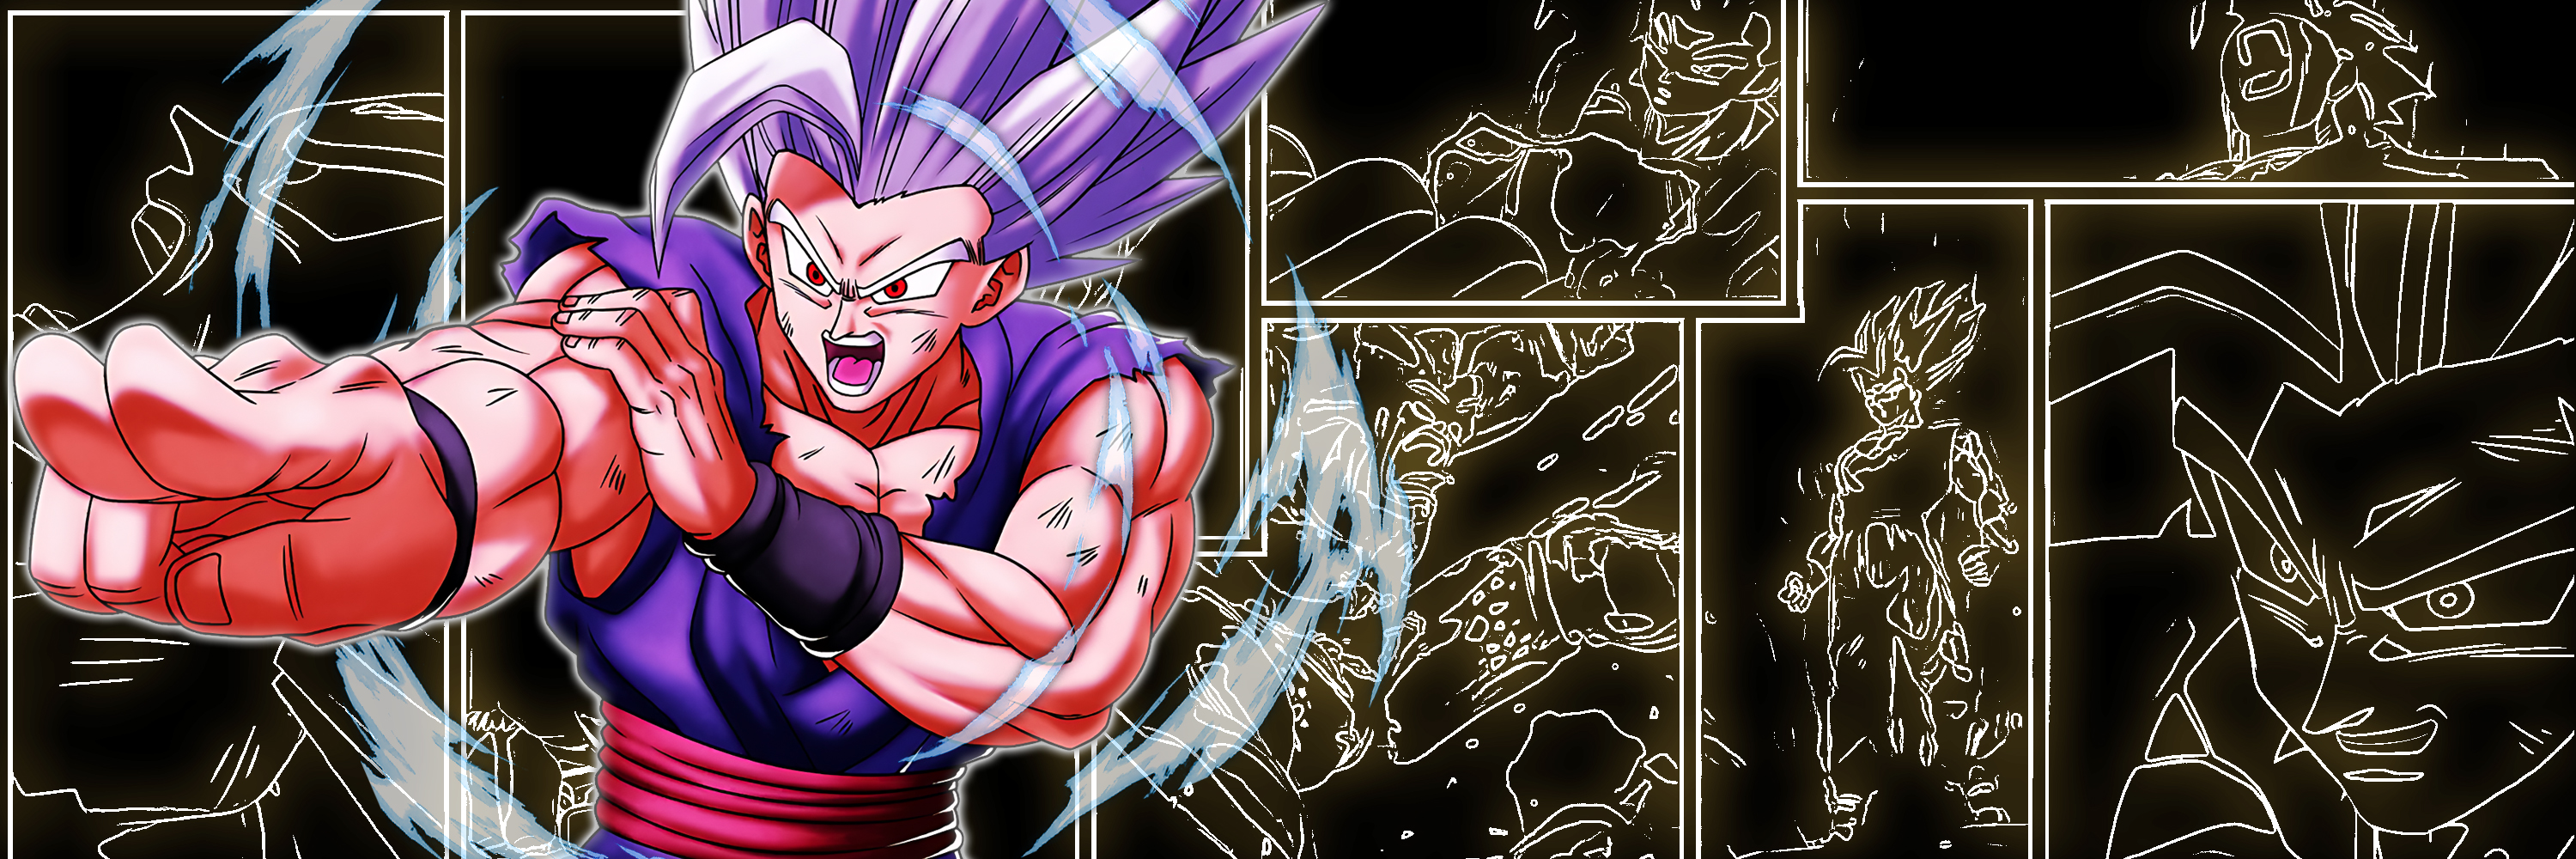 SoulF2P - [ LL Beast Gohan Headers (Bright Lines Style) ] THX FOR 600 FOLLOWERS! Free to use ✌️! Like